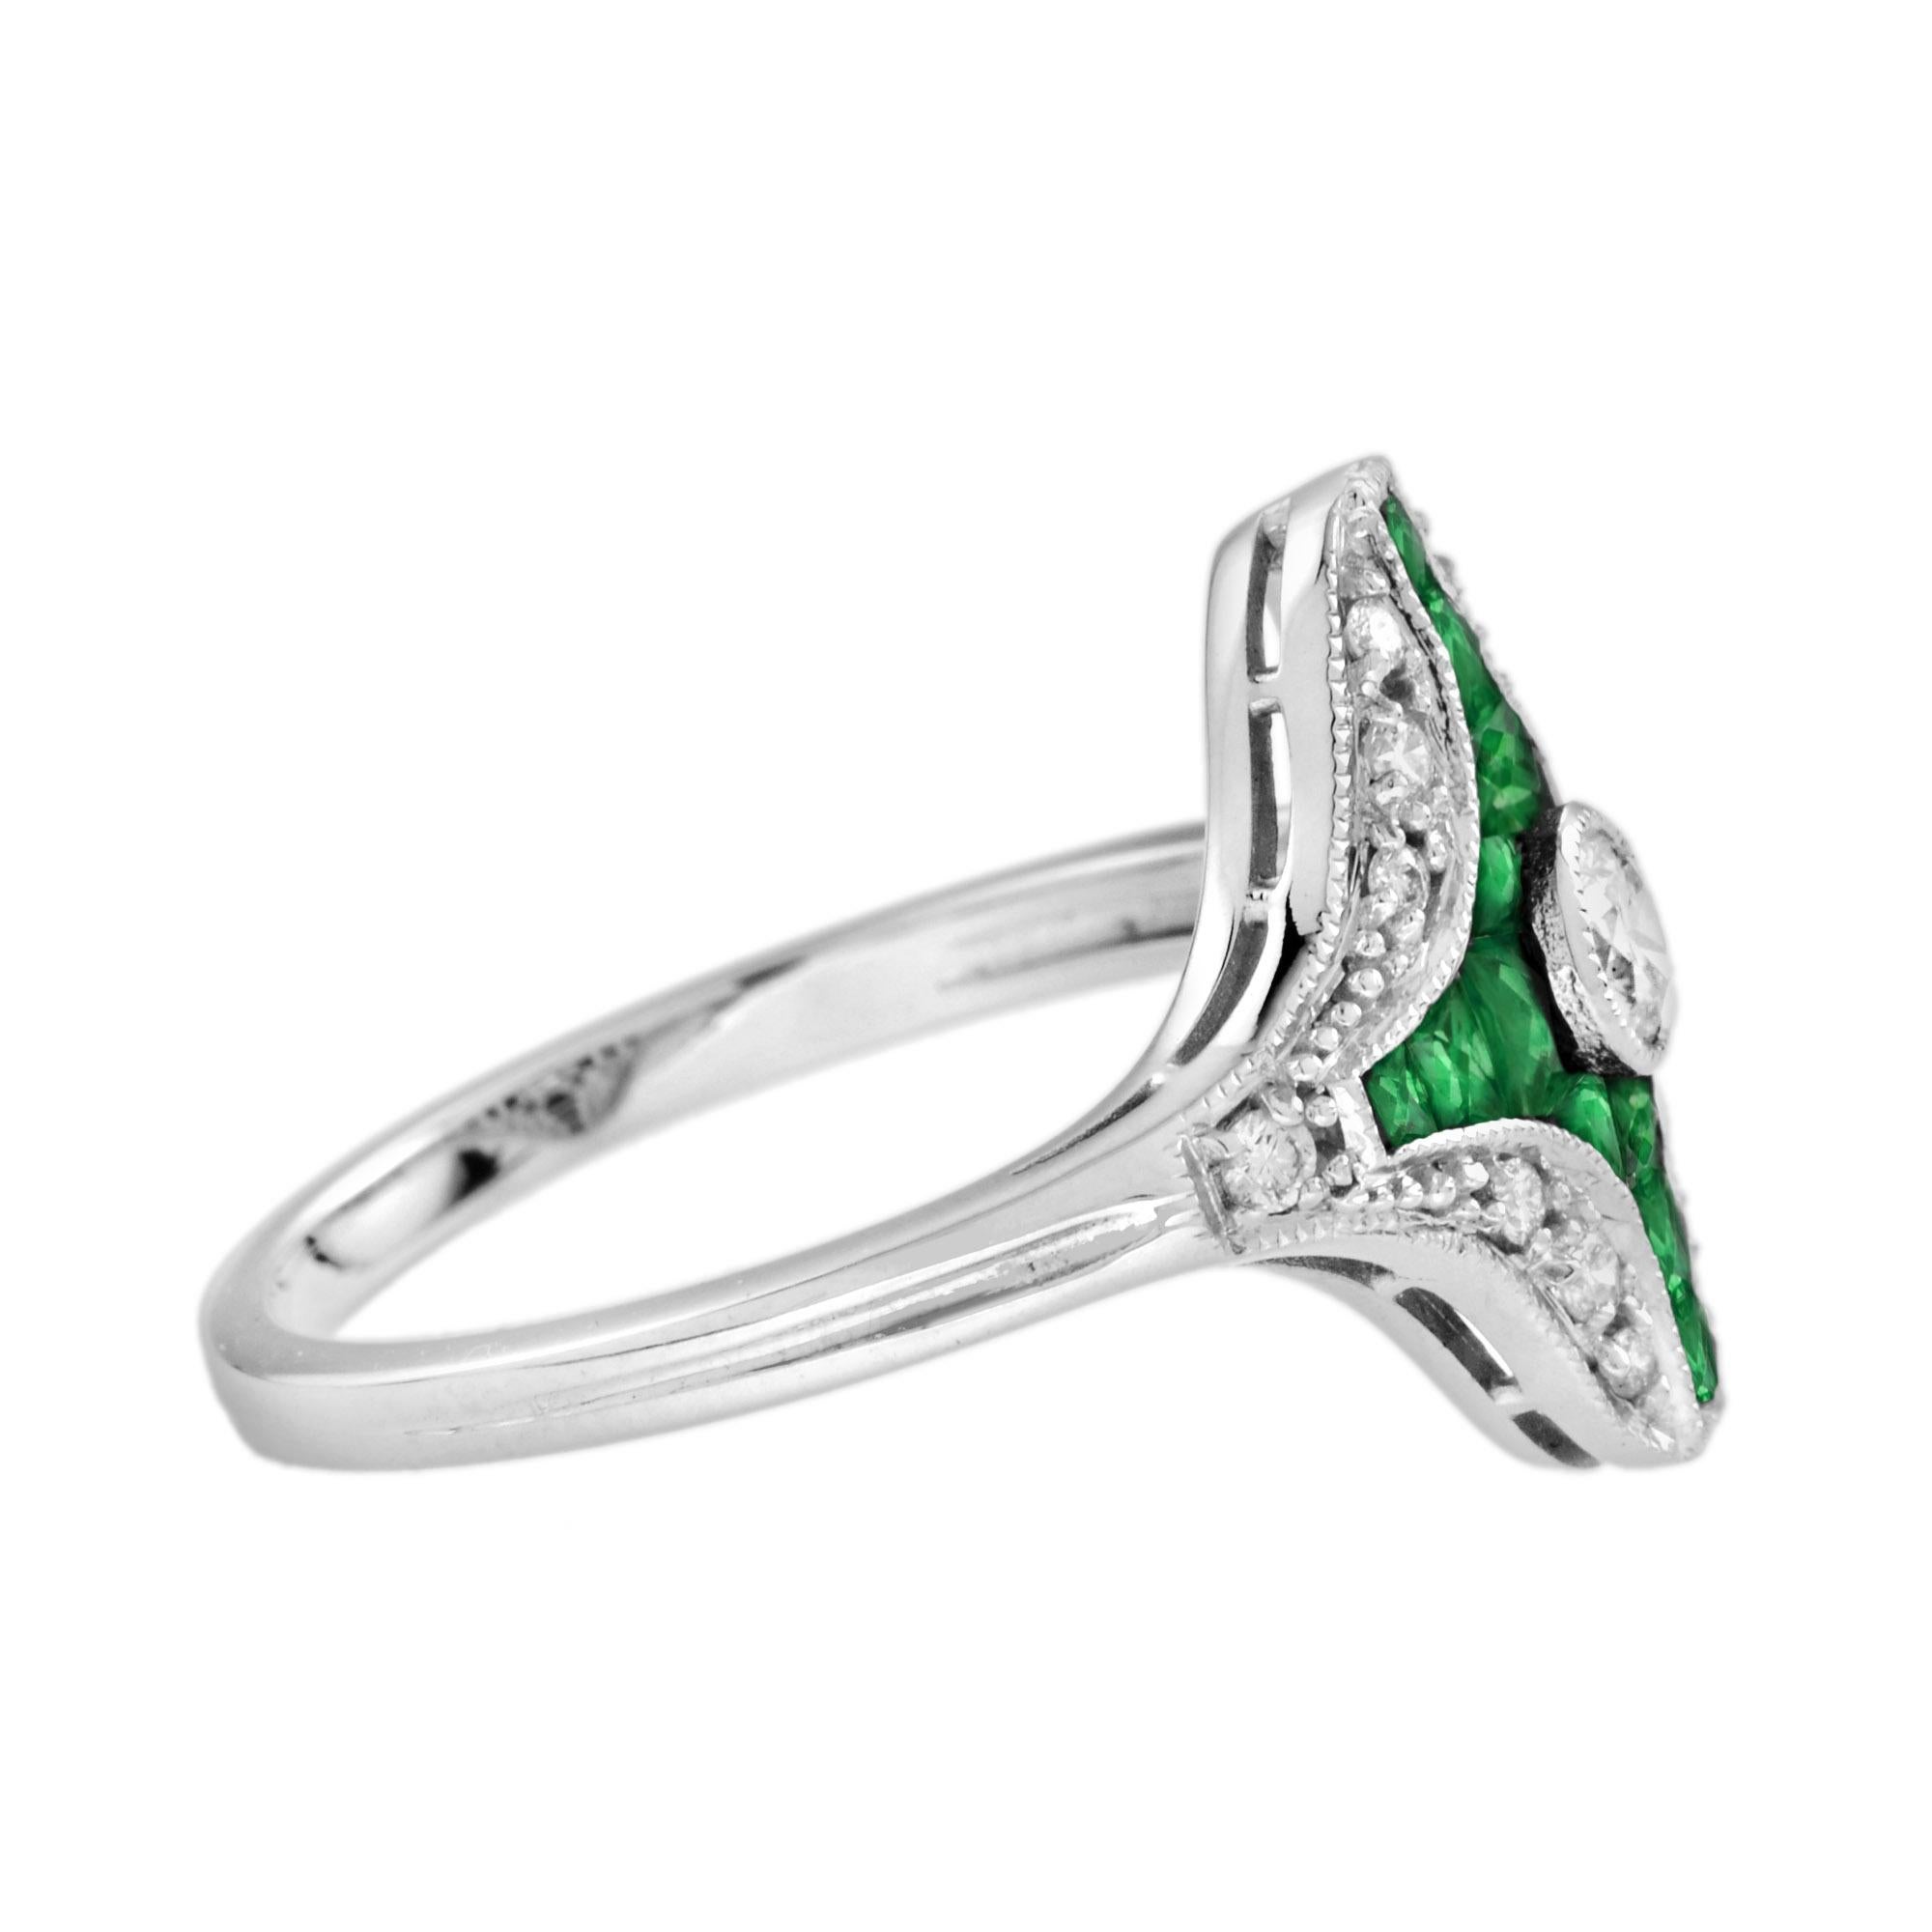 For Sale:  Diamond and Emerald Art Deco Style Ring in 14K white Gold 4